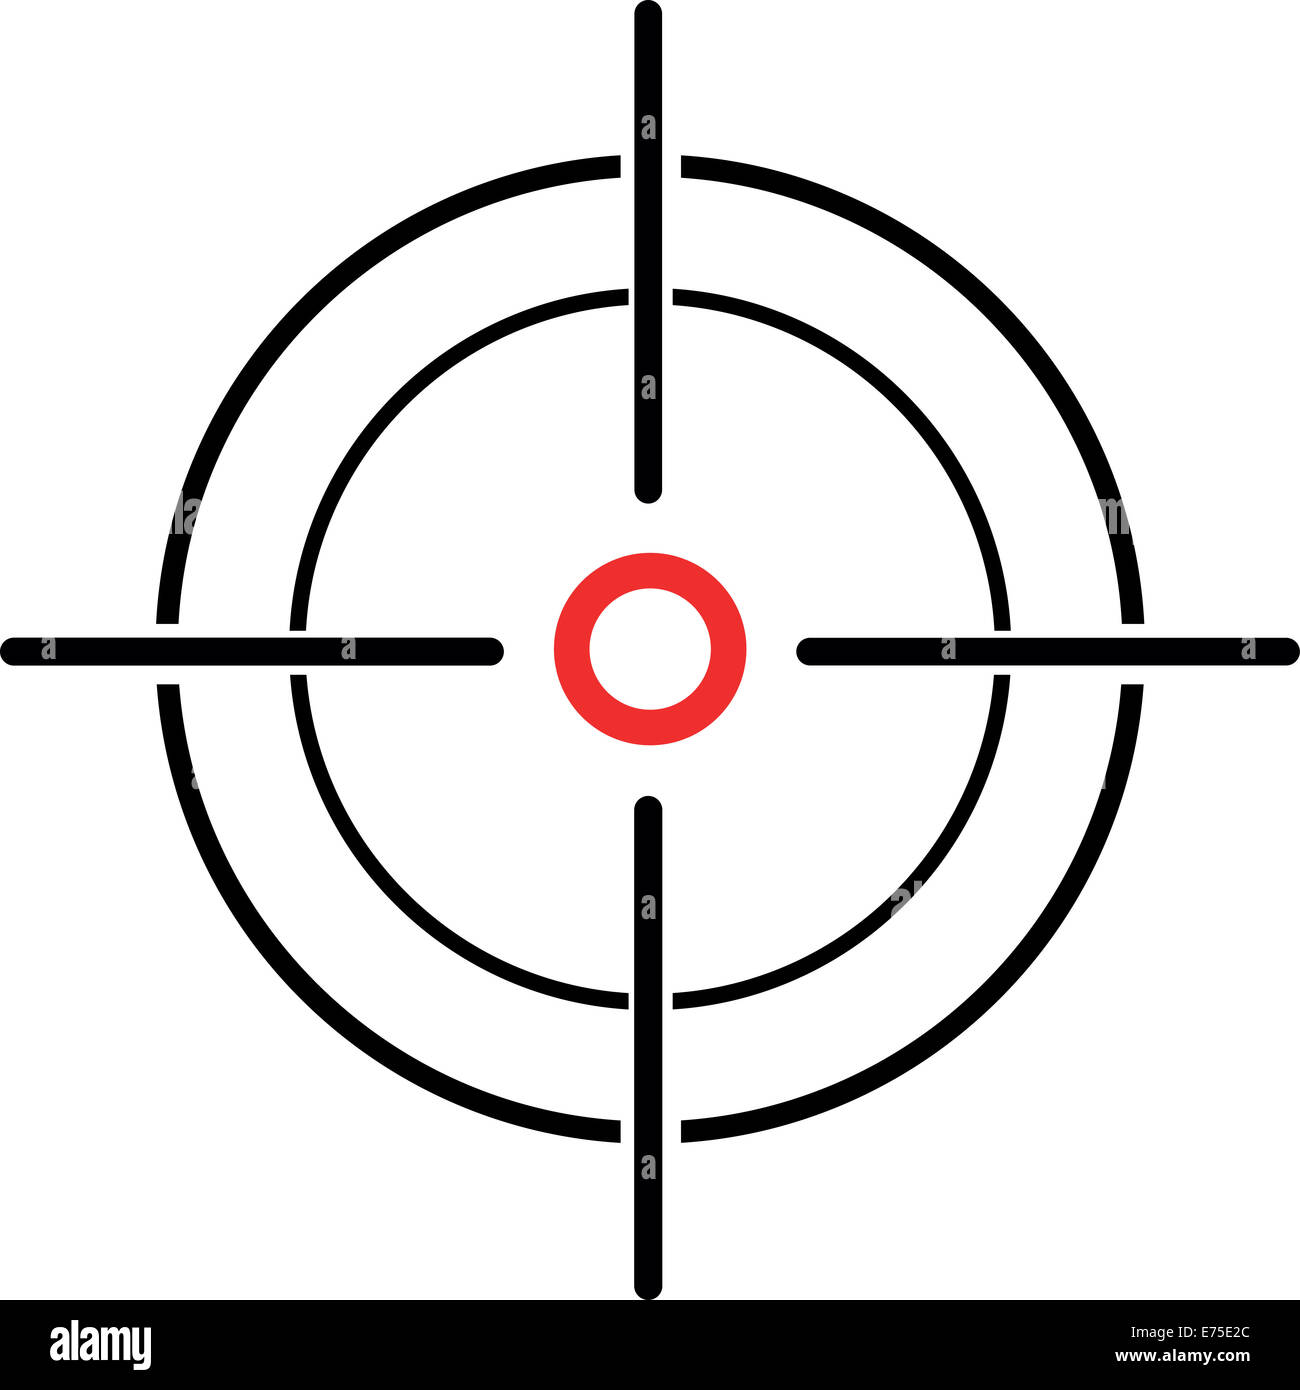 An Illustration of a crosshair reticle on a white background Stock Photo